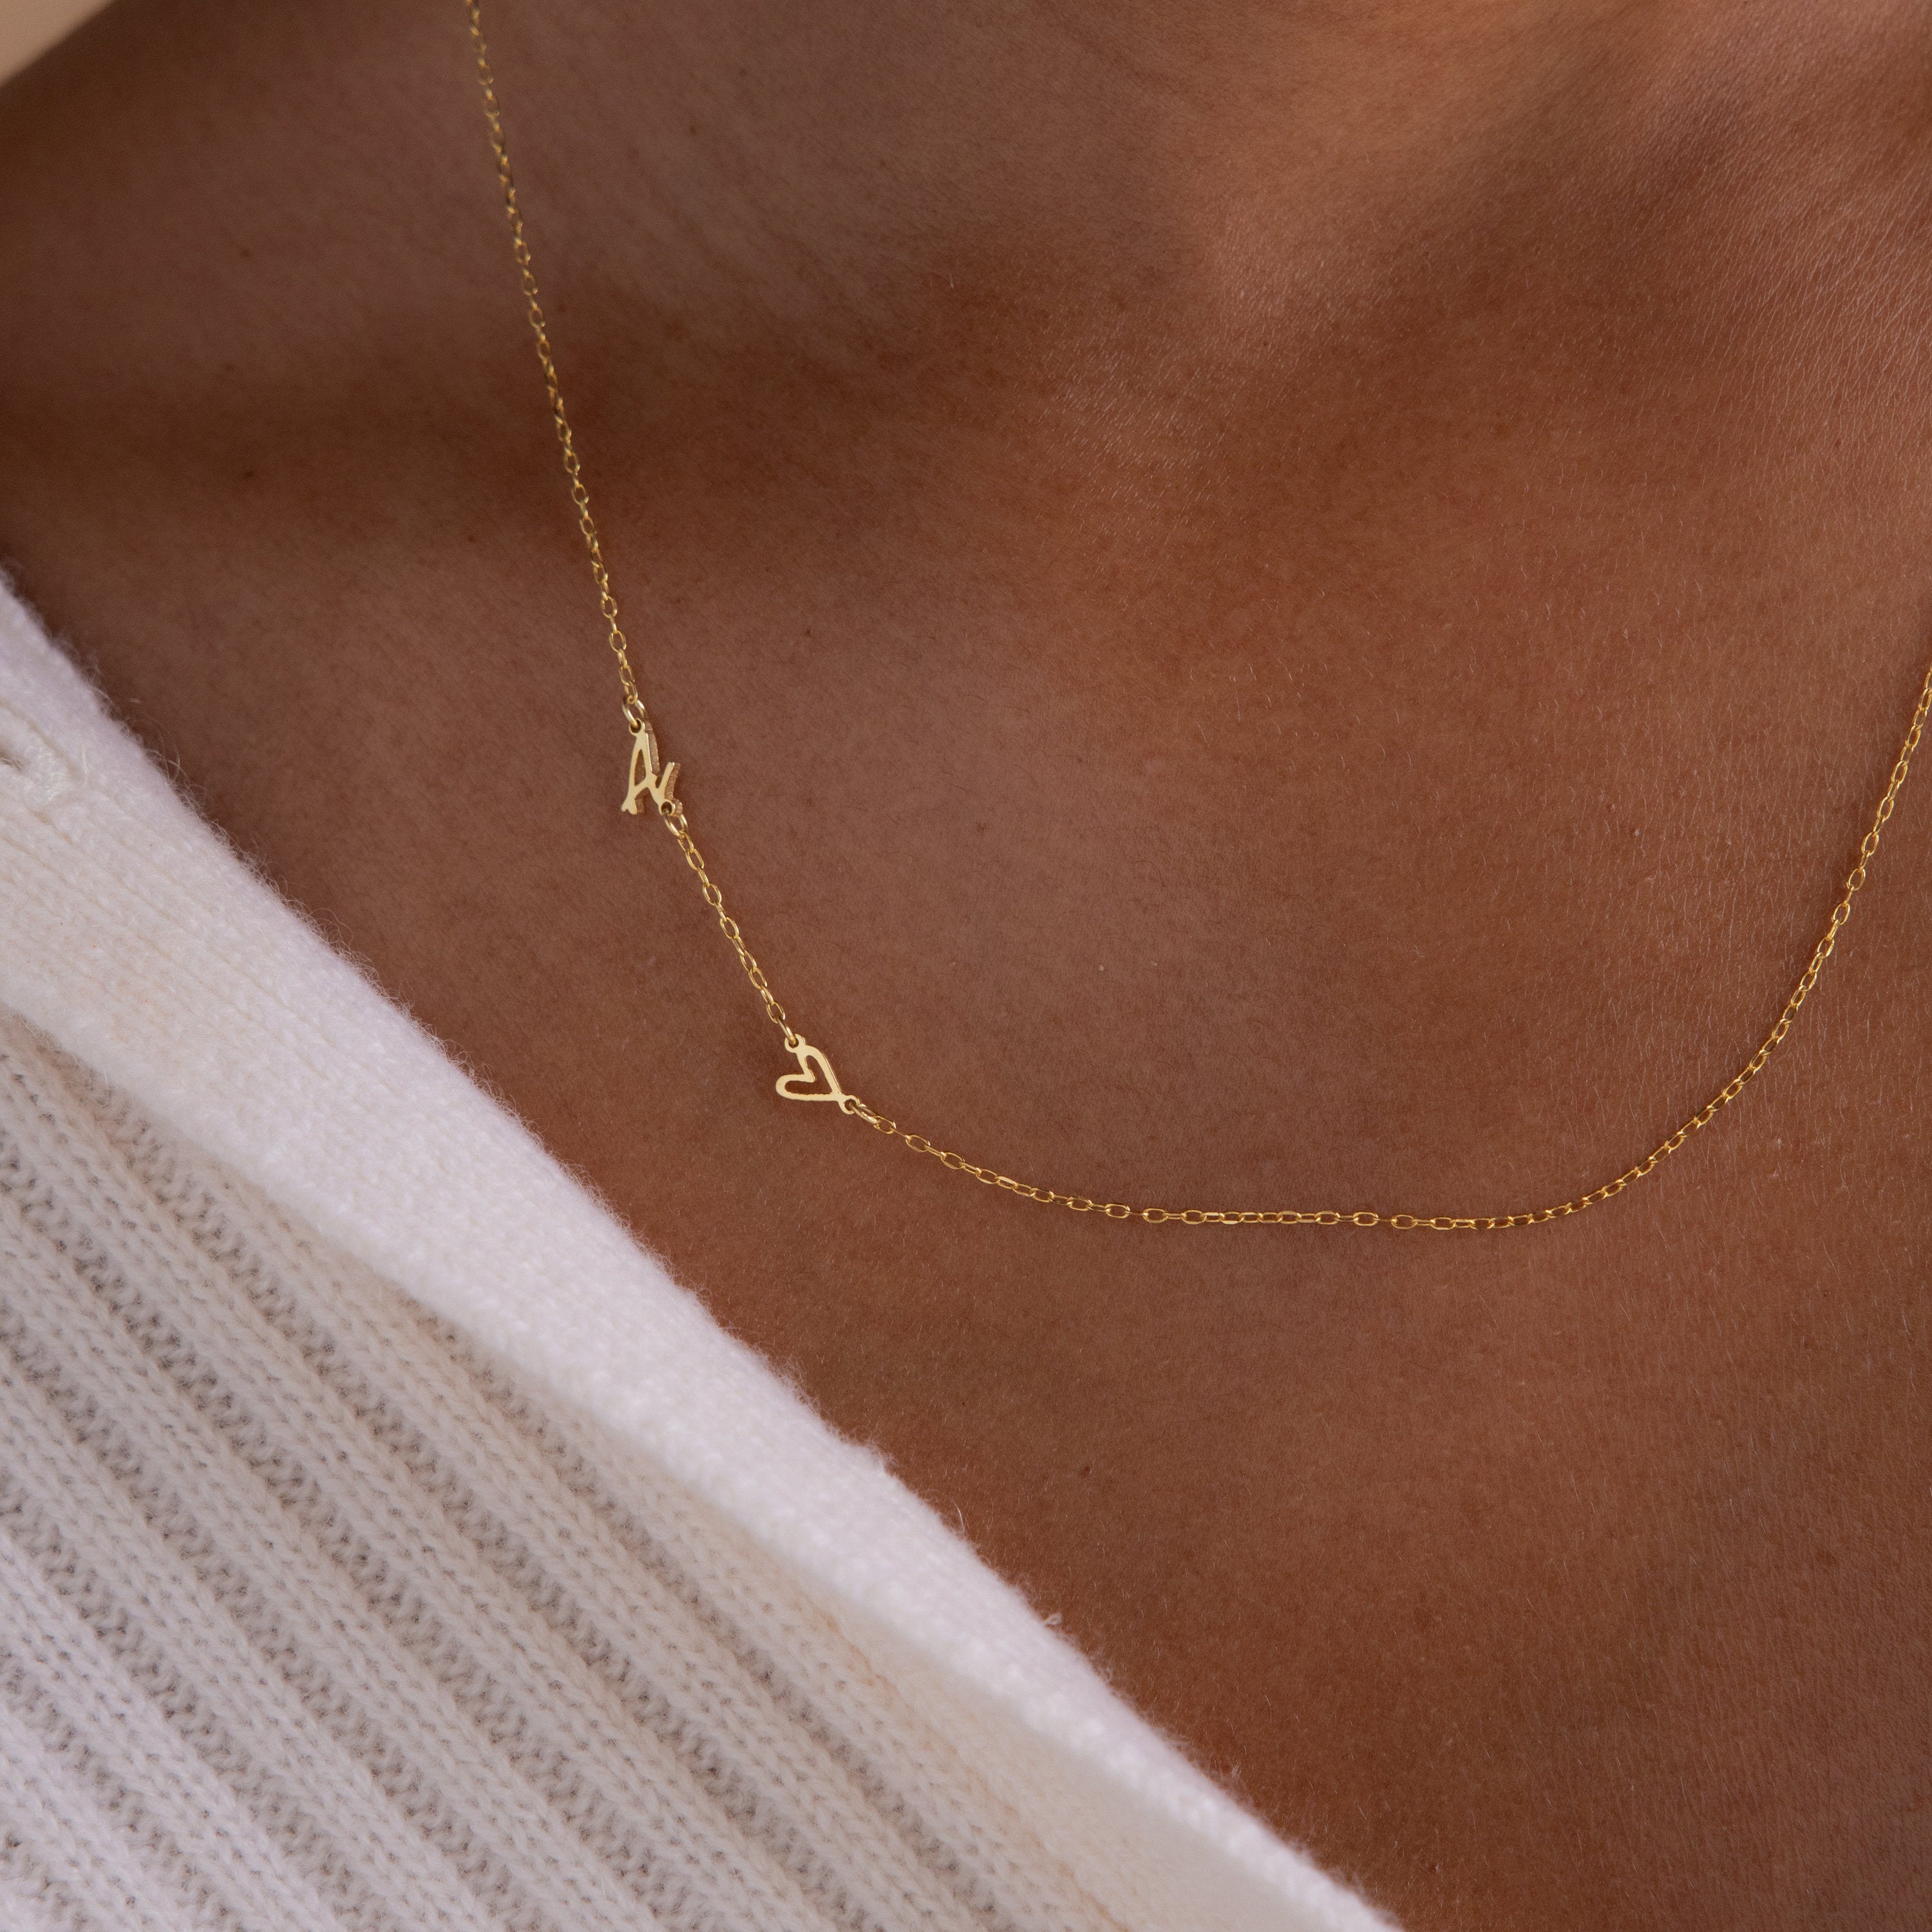 14K Gold Sideways Initials Necklace: Necklaces with Initials and symbols –  BELKYmood